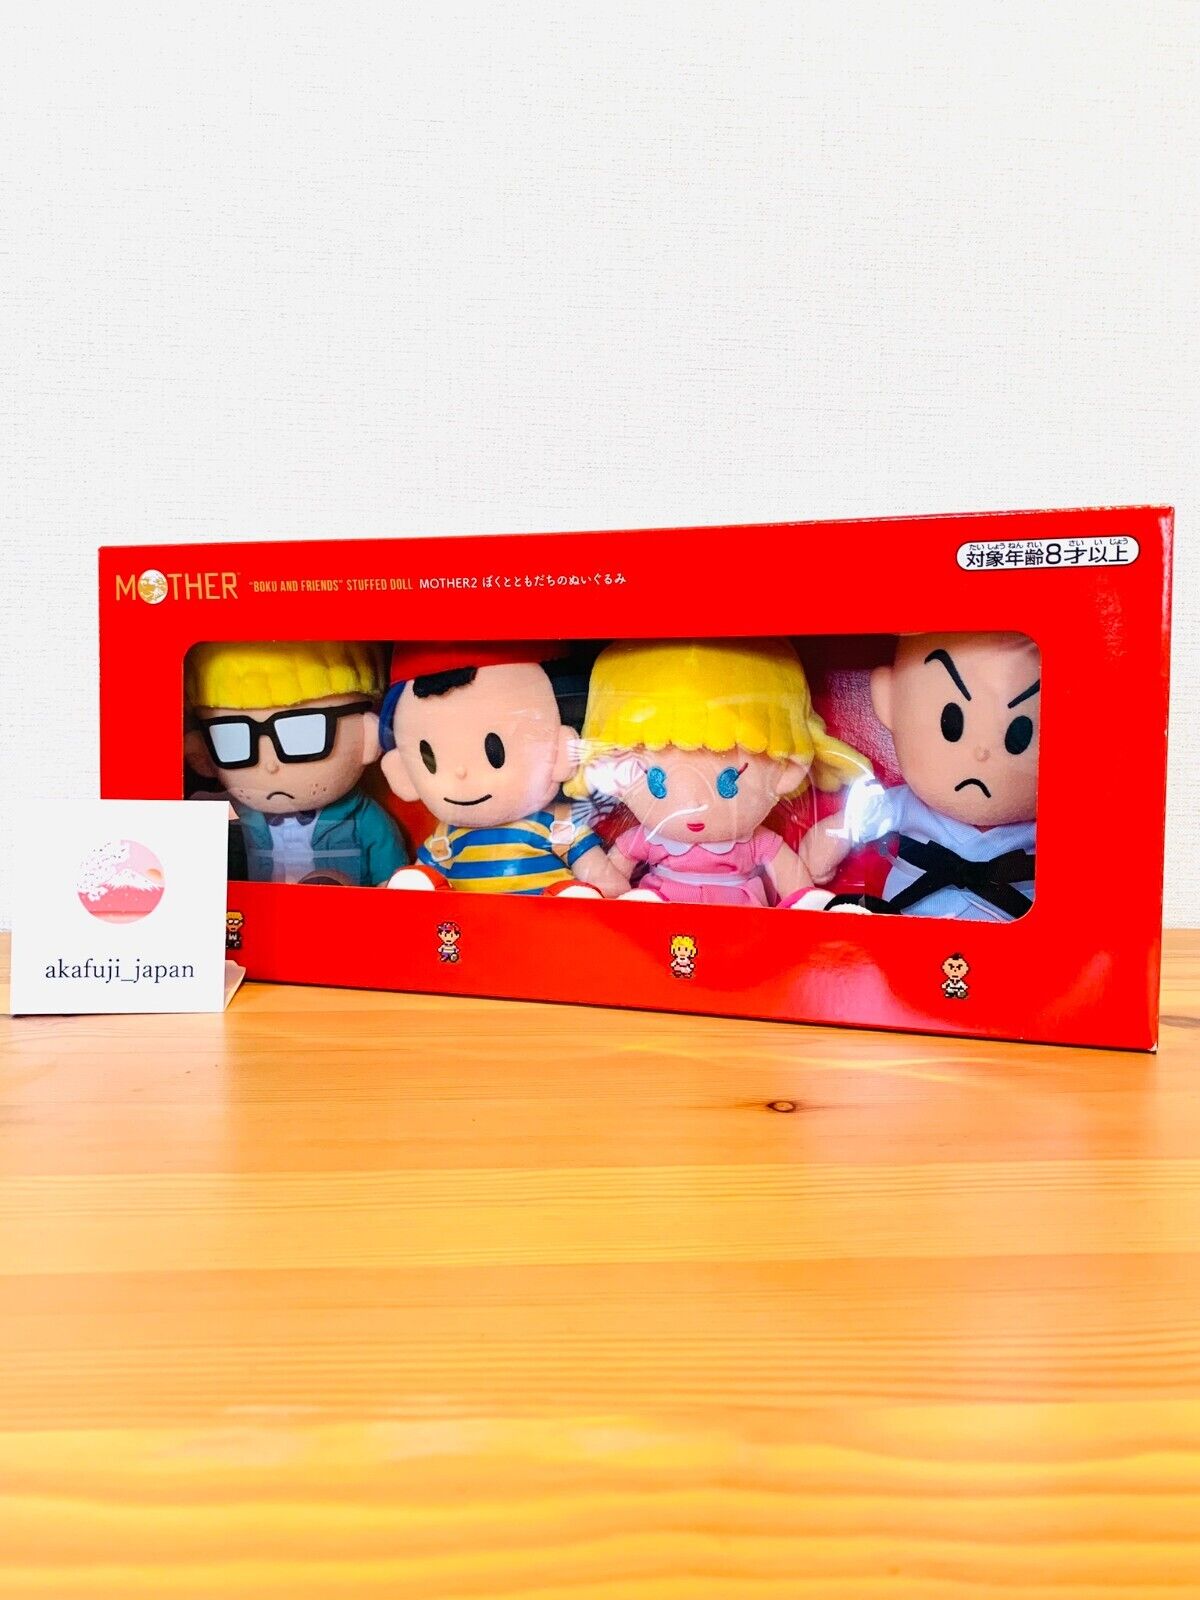 EarthBound Official Chosen Four Plush Plushie Set Hobonichi Mother 2 Project New